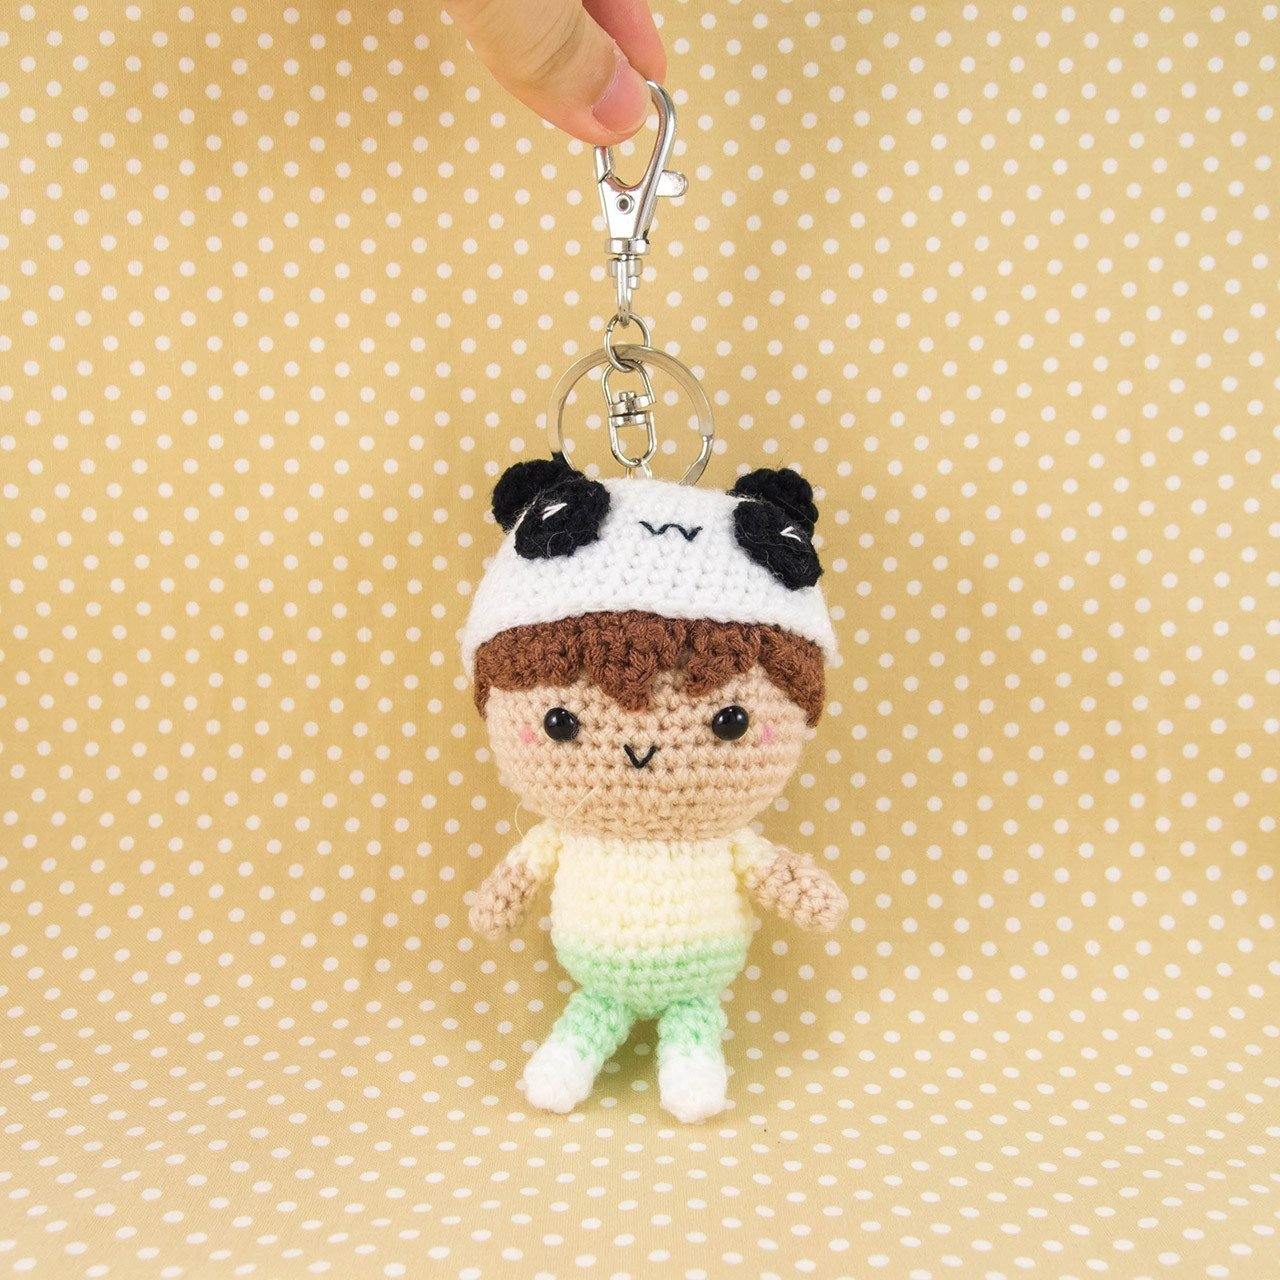 Boy wearing Panda Hat Doll with Key Chain Attached